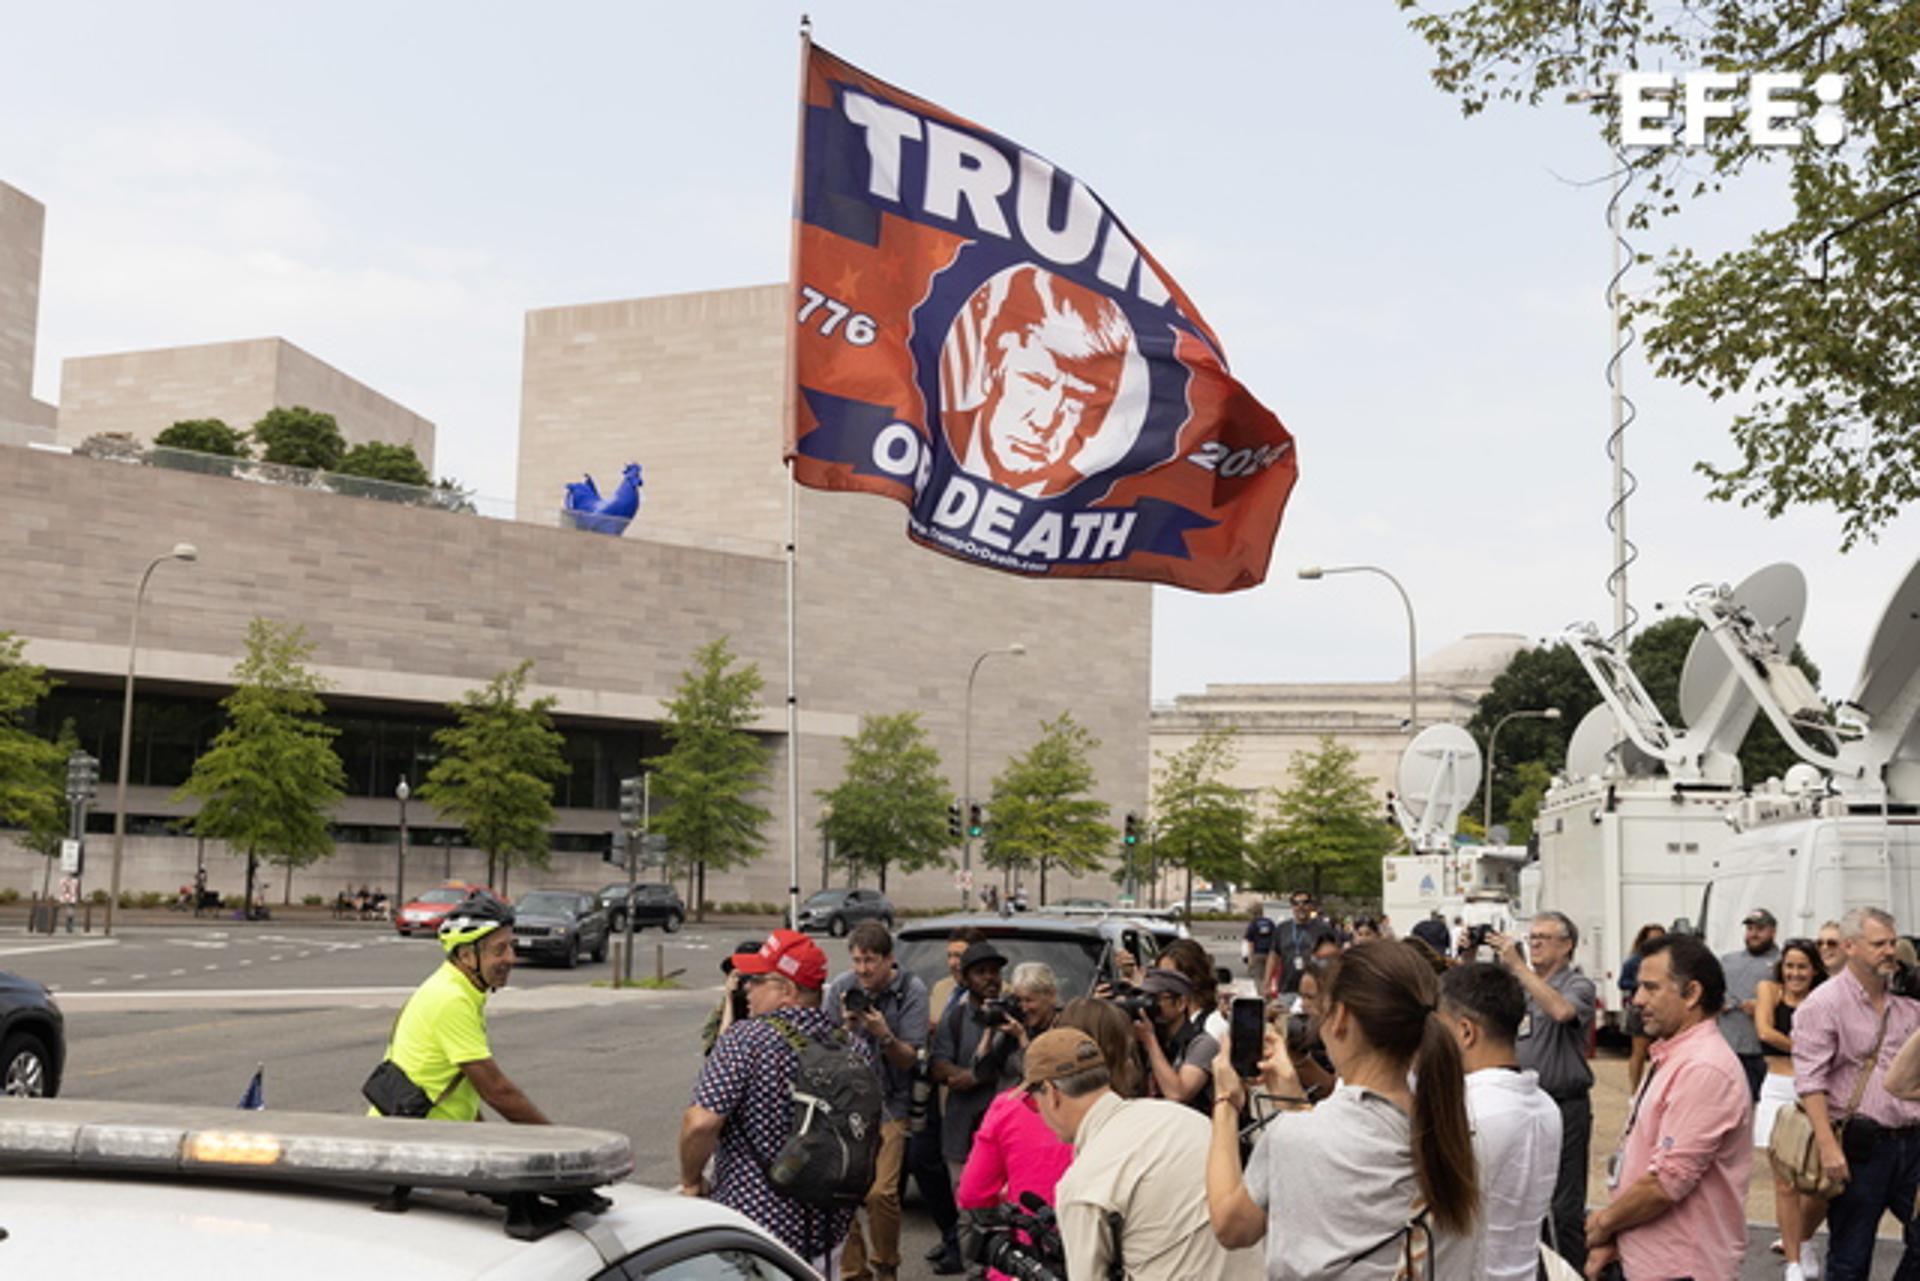 An opponent (L) and a supporter of former US President Donald Trump engage in a shouting match outside the US federal courthouse in Washington on 3 August 2023 ahead of Trump's arraignment. EFE/EPA/MICHAEL REYNOLDS
yell at one another as members of the media look on outside of the E. Barrett Prettyman United States Courthouse, where Judge Tanya Sue Chutkan will arraign former US President Donald J. Trump, in Washington, DC, USA, 03 August 2023. A federal grand jury has indicted Trump over his efforts to overturn the 2020 presidential election. (Estados Unidos) EFE/EPA/MICHAEL REYNOLDS
